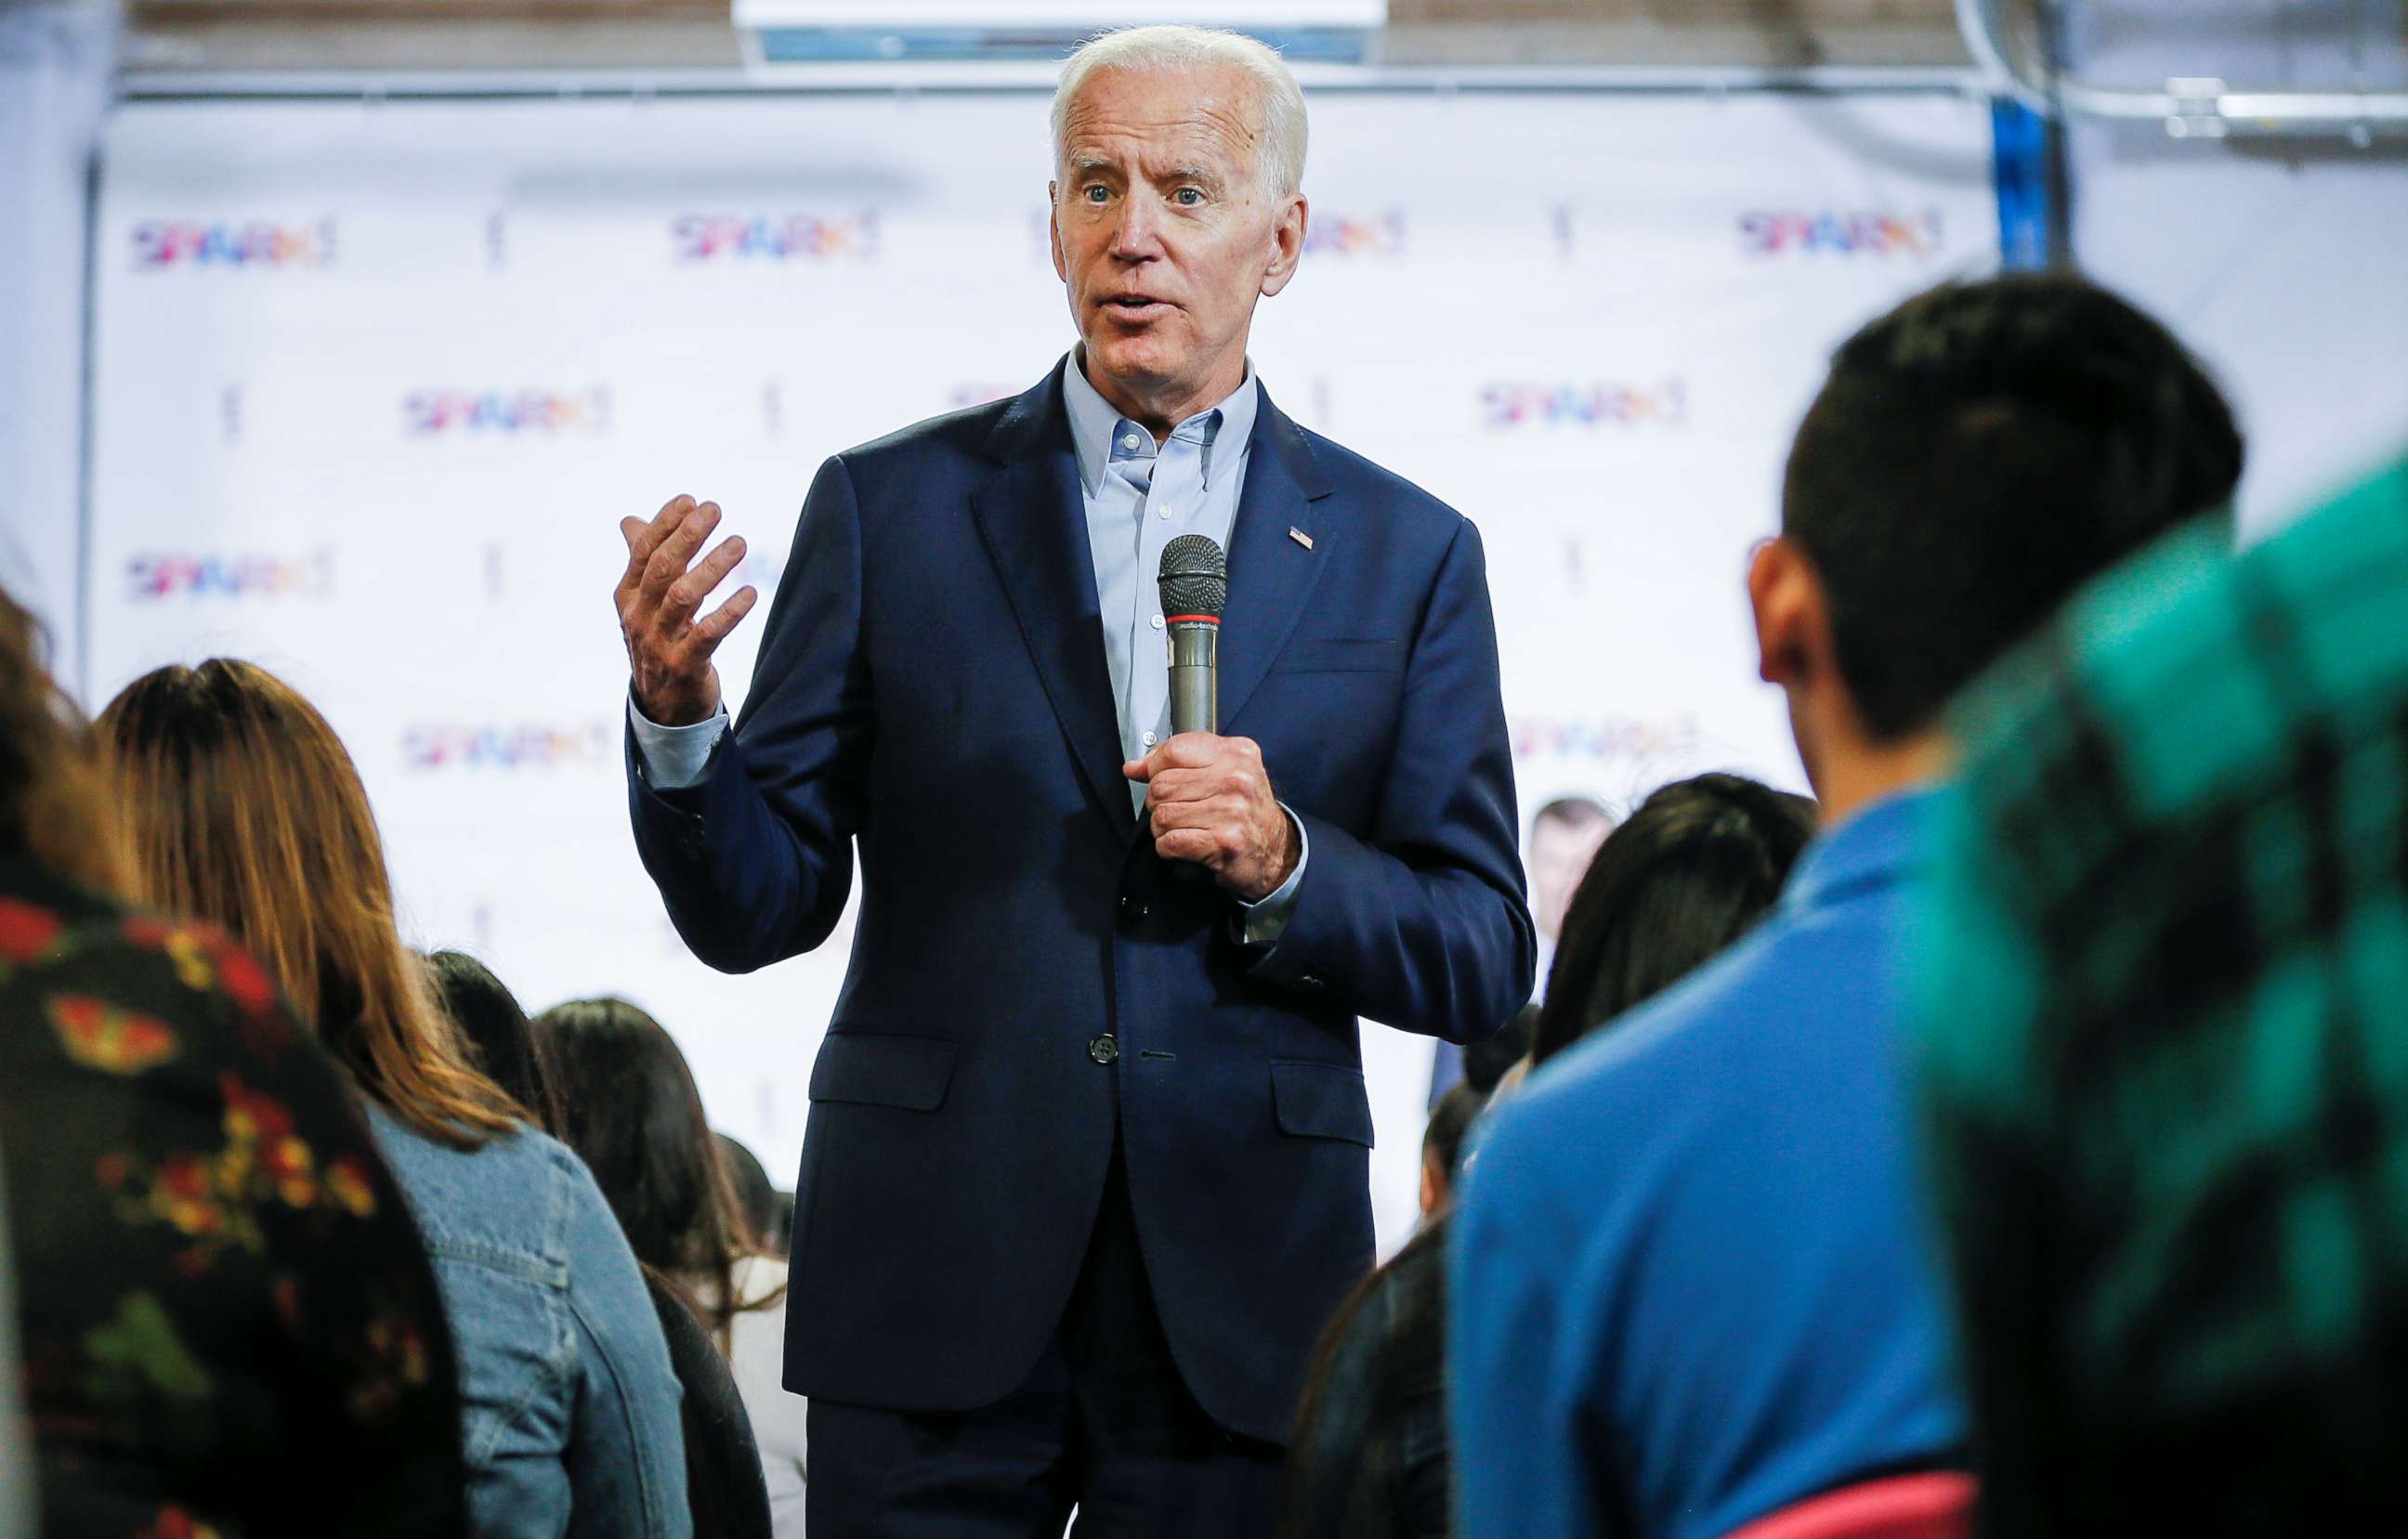 PHOTO: Democratic Presidential candidate Joe Biden gives a pep talk to Dallas County high school students during a campaign event at the SPARK! educational center in Dallas, Texas, May 29, 2019.